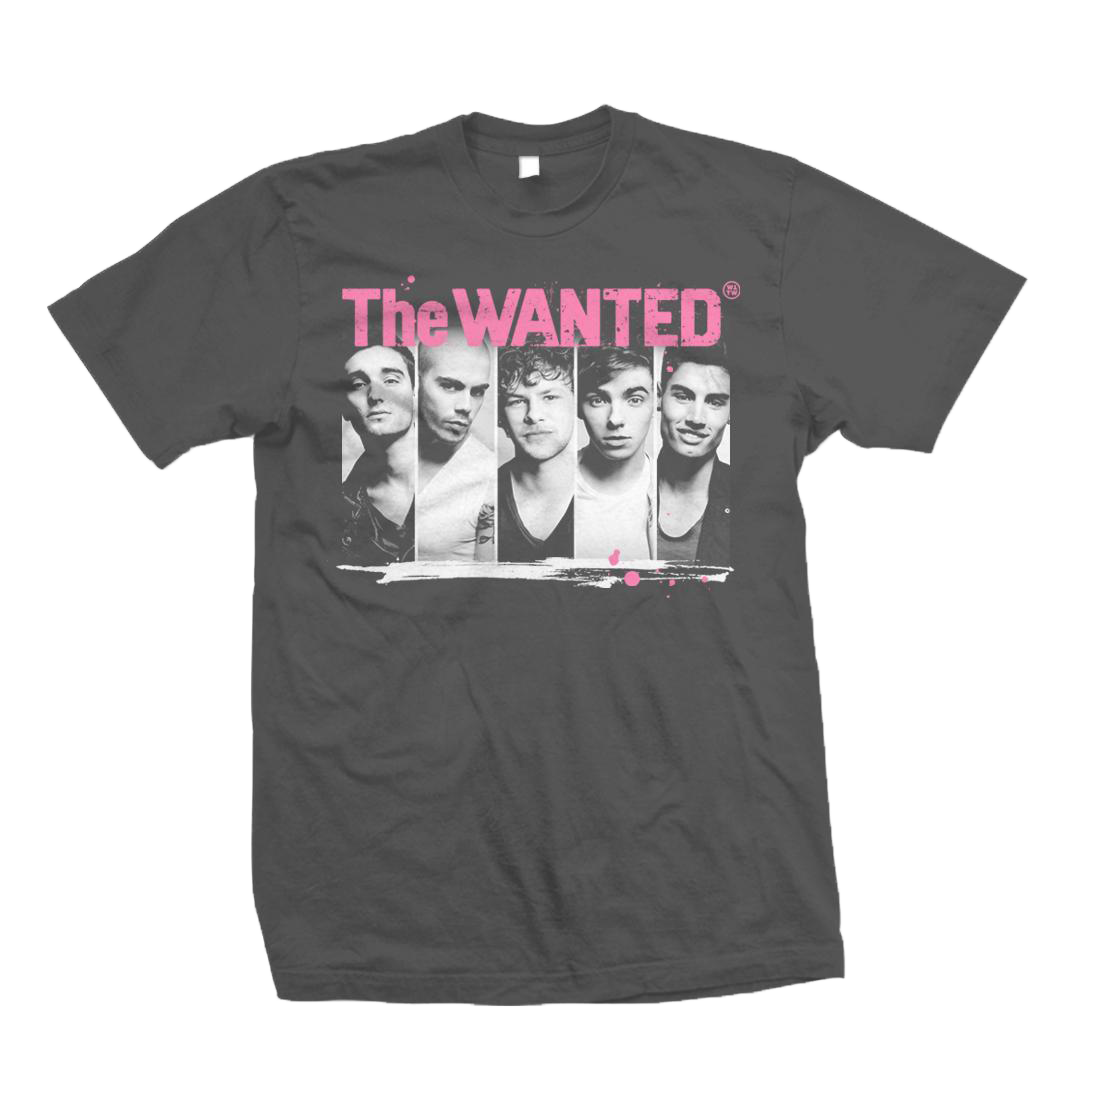 The Wanted - The Wanted Retro T-Shirt